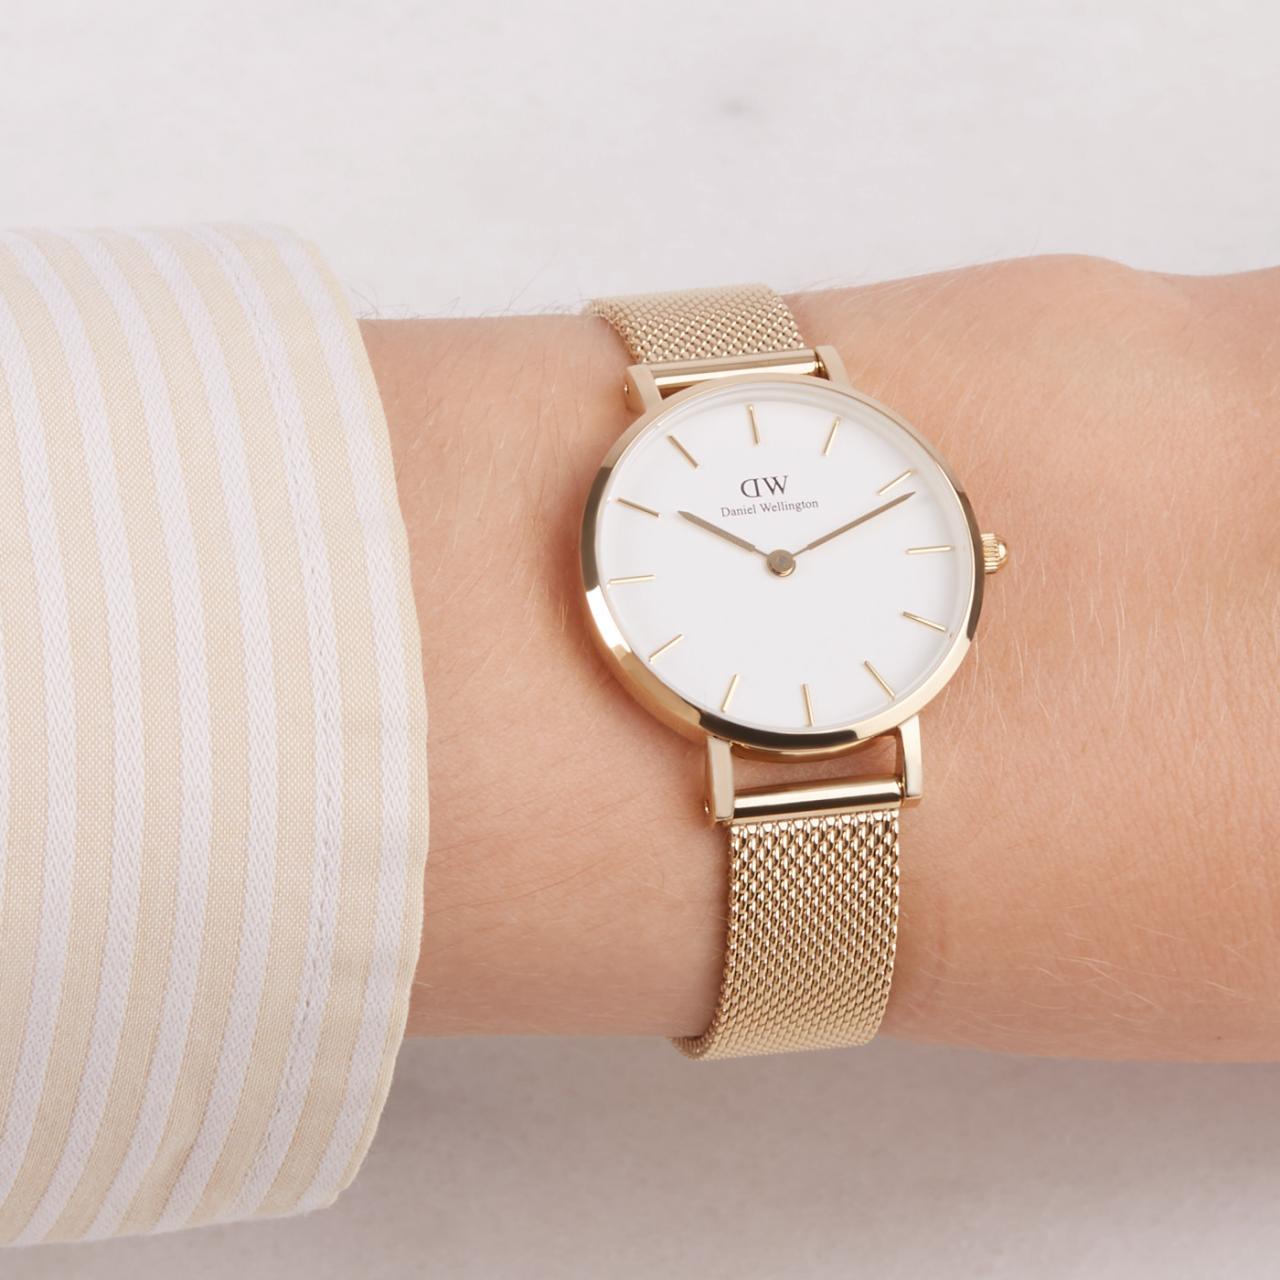 Daniel Wellington 28mm Gold Plated Petite Evergold Mesh Strap Watch with White Dial